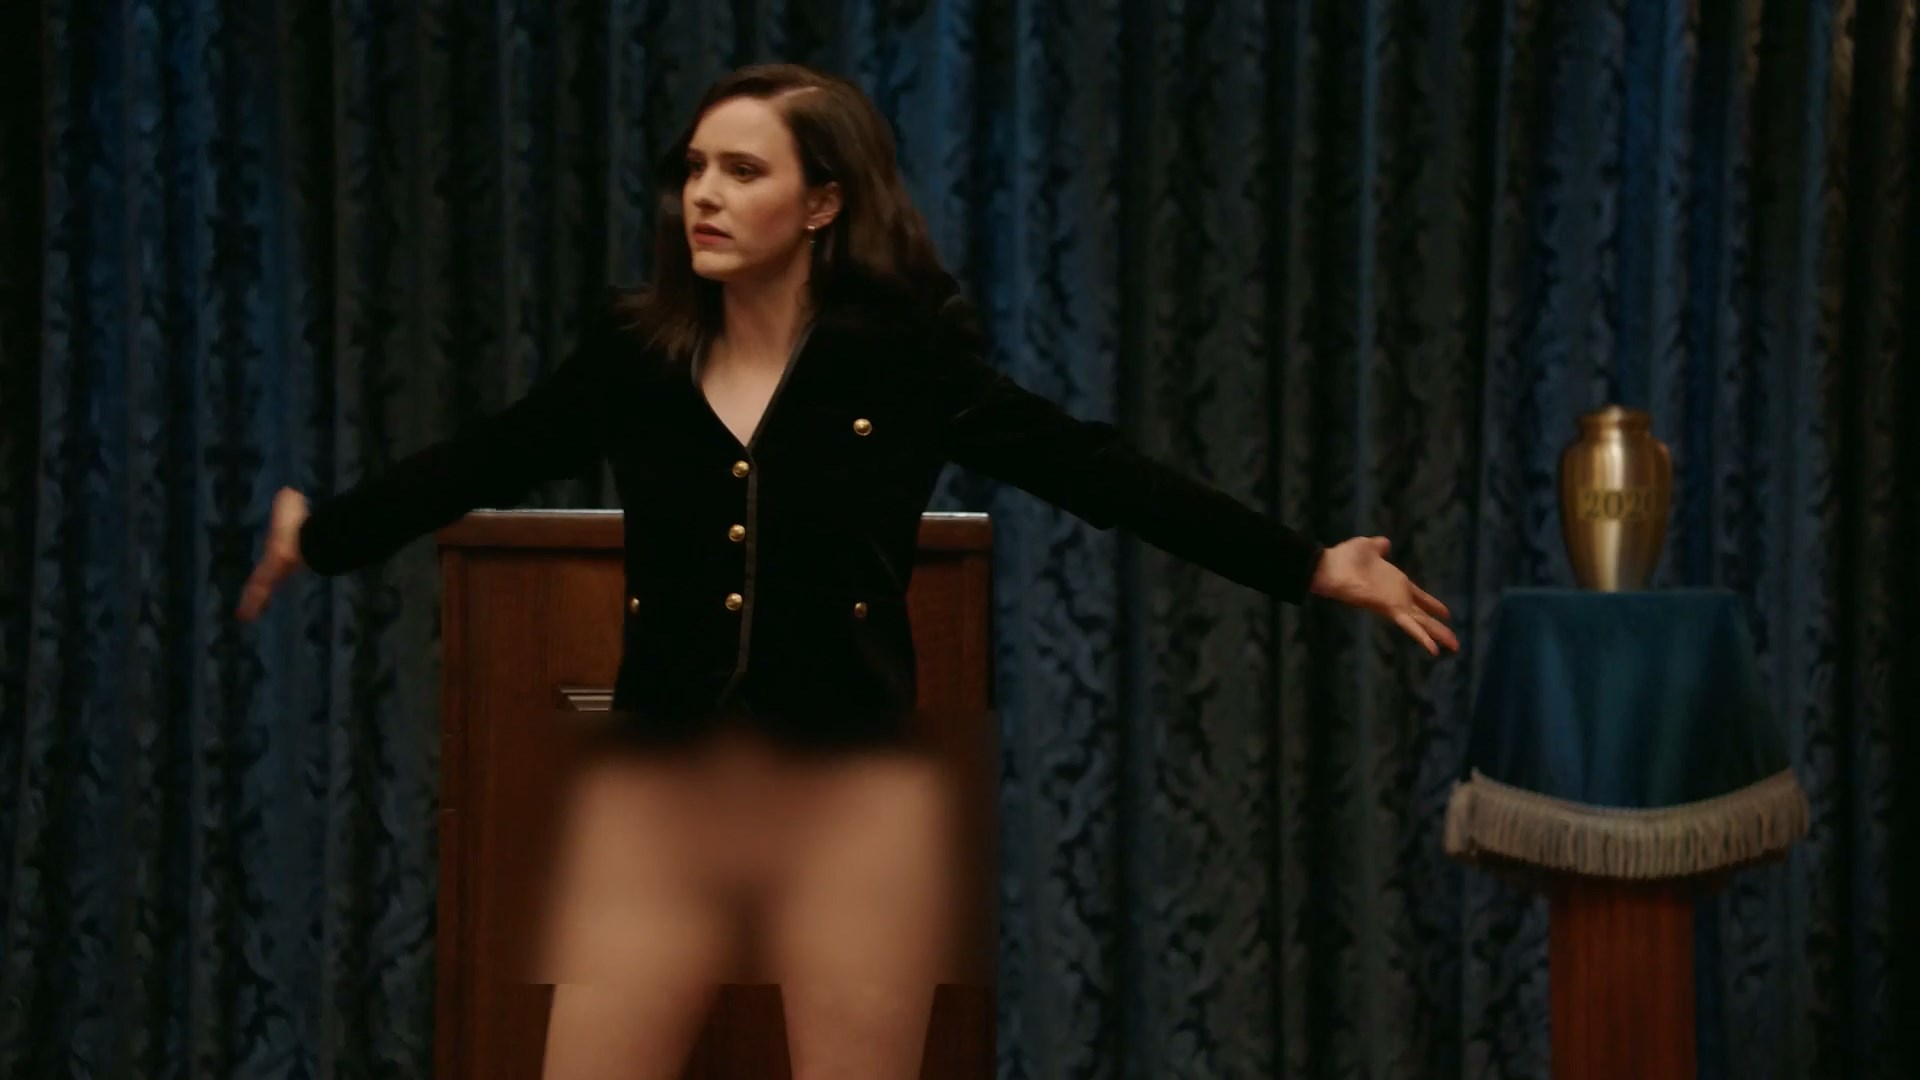 Mrs nudity marvelous the maisel Parent reviews